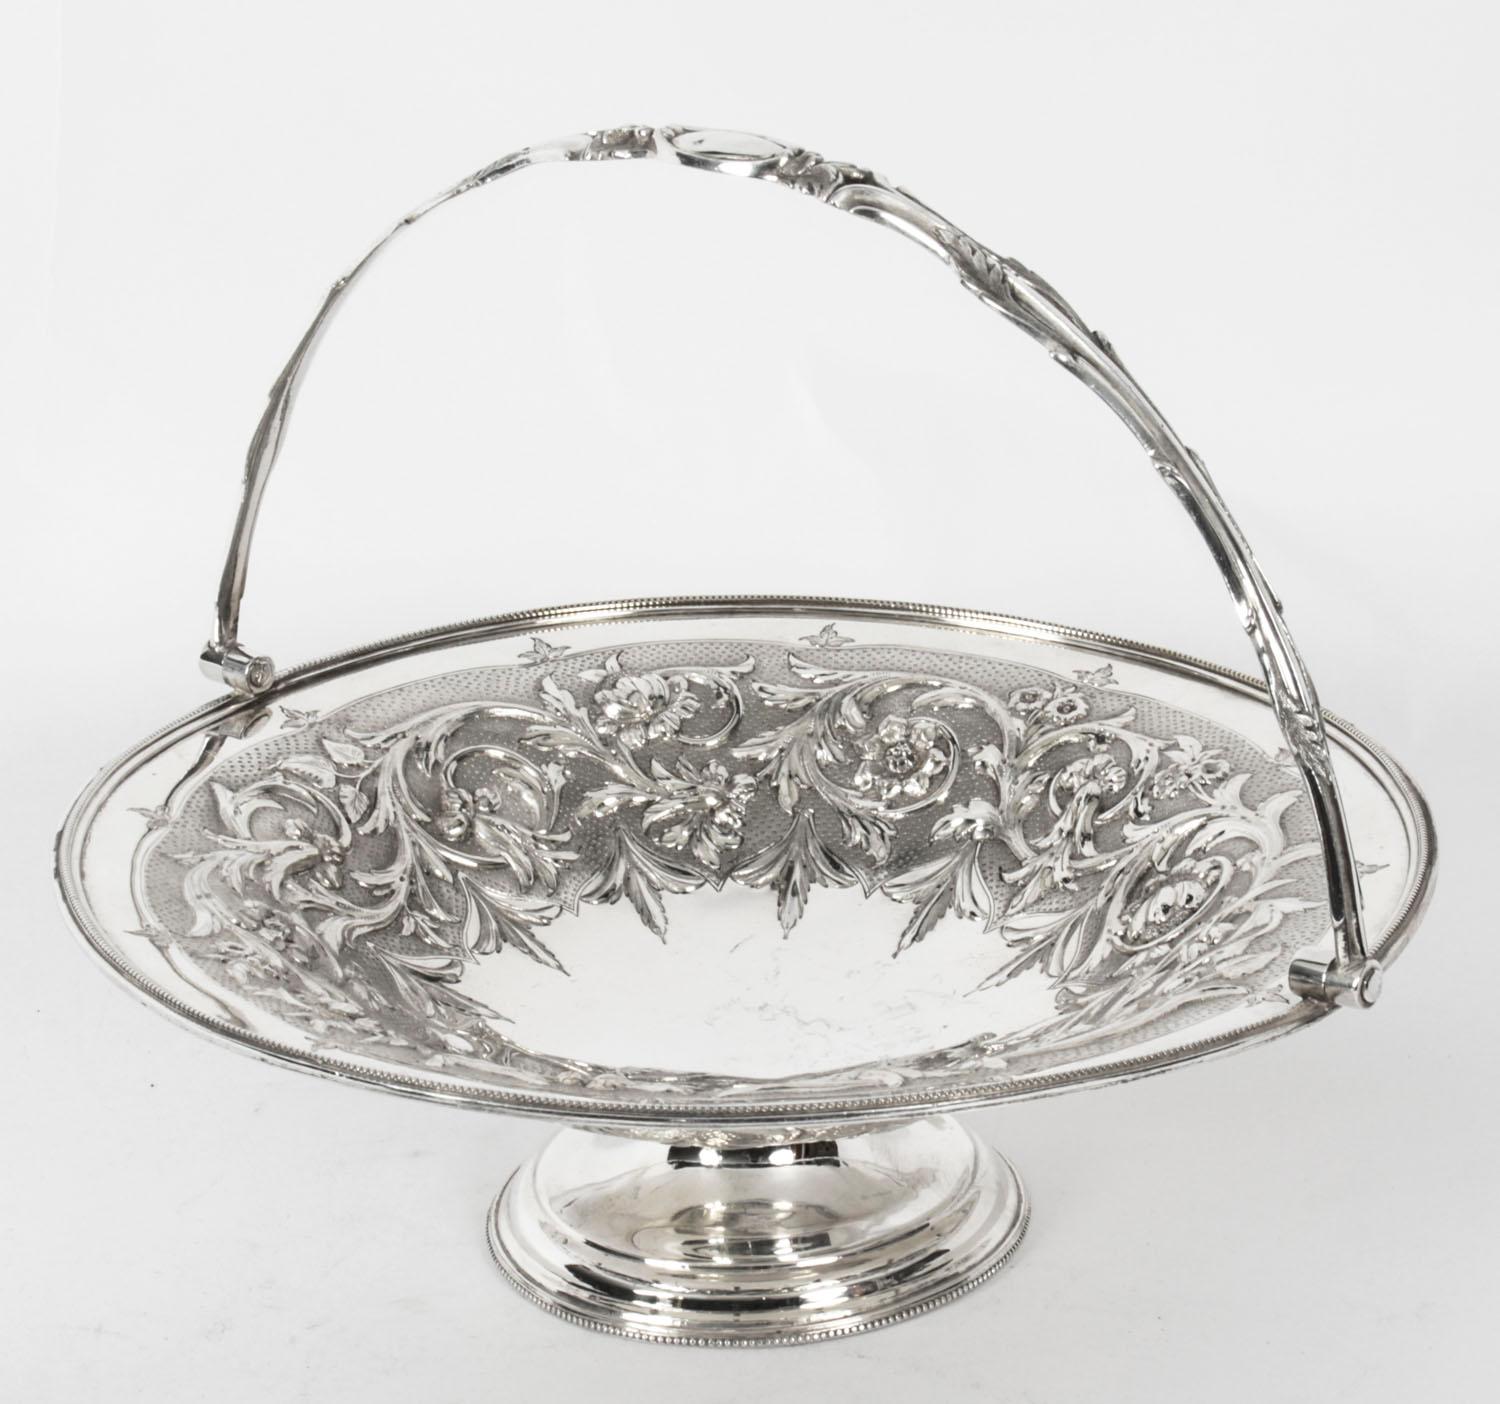 Antique Victorian Silver Plated Fruit Basket William Gallimore & Co, 19th C 1